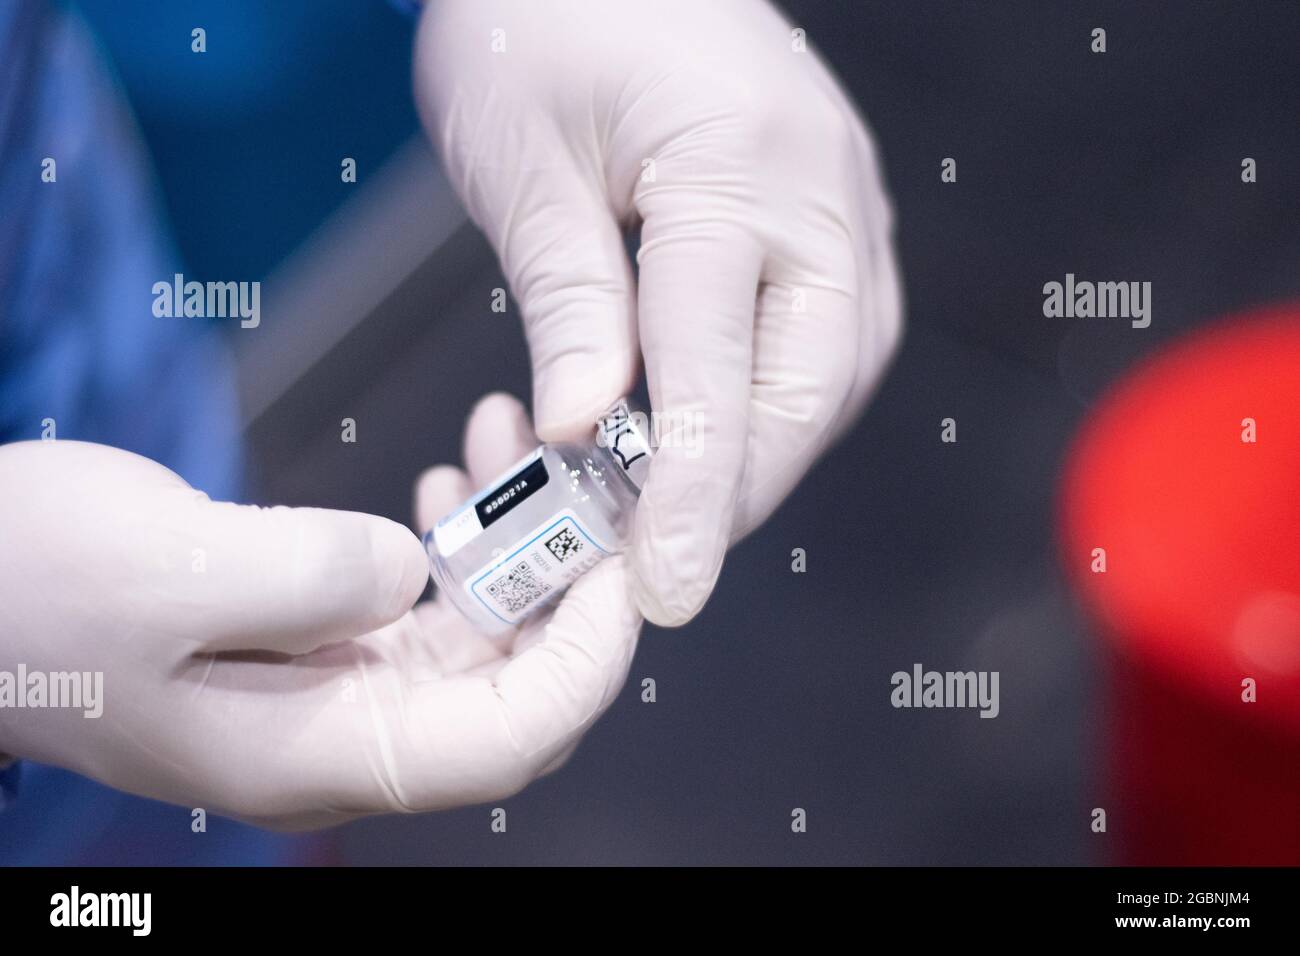 A nurse shows the vial the Moderna COVID-19 Vaccine as people from ages 25 to 30 start their vaccination phase with the Moderna novel COVID-19 vaccine against the Coronavirus disease in Bogota, Colombia on August 3, 2021. Stock Photo